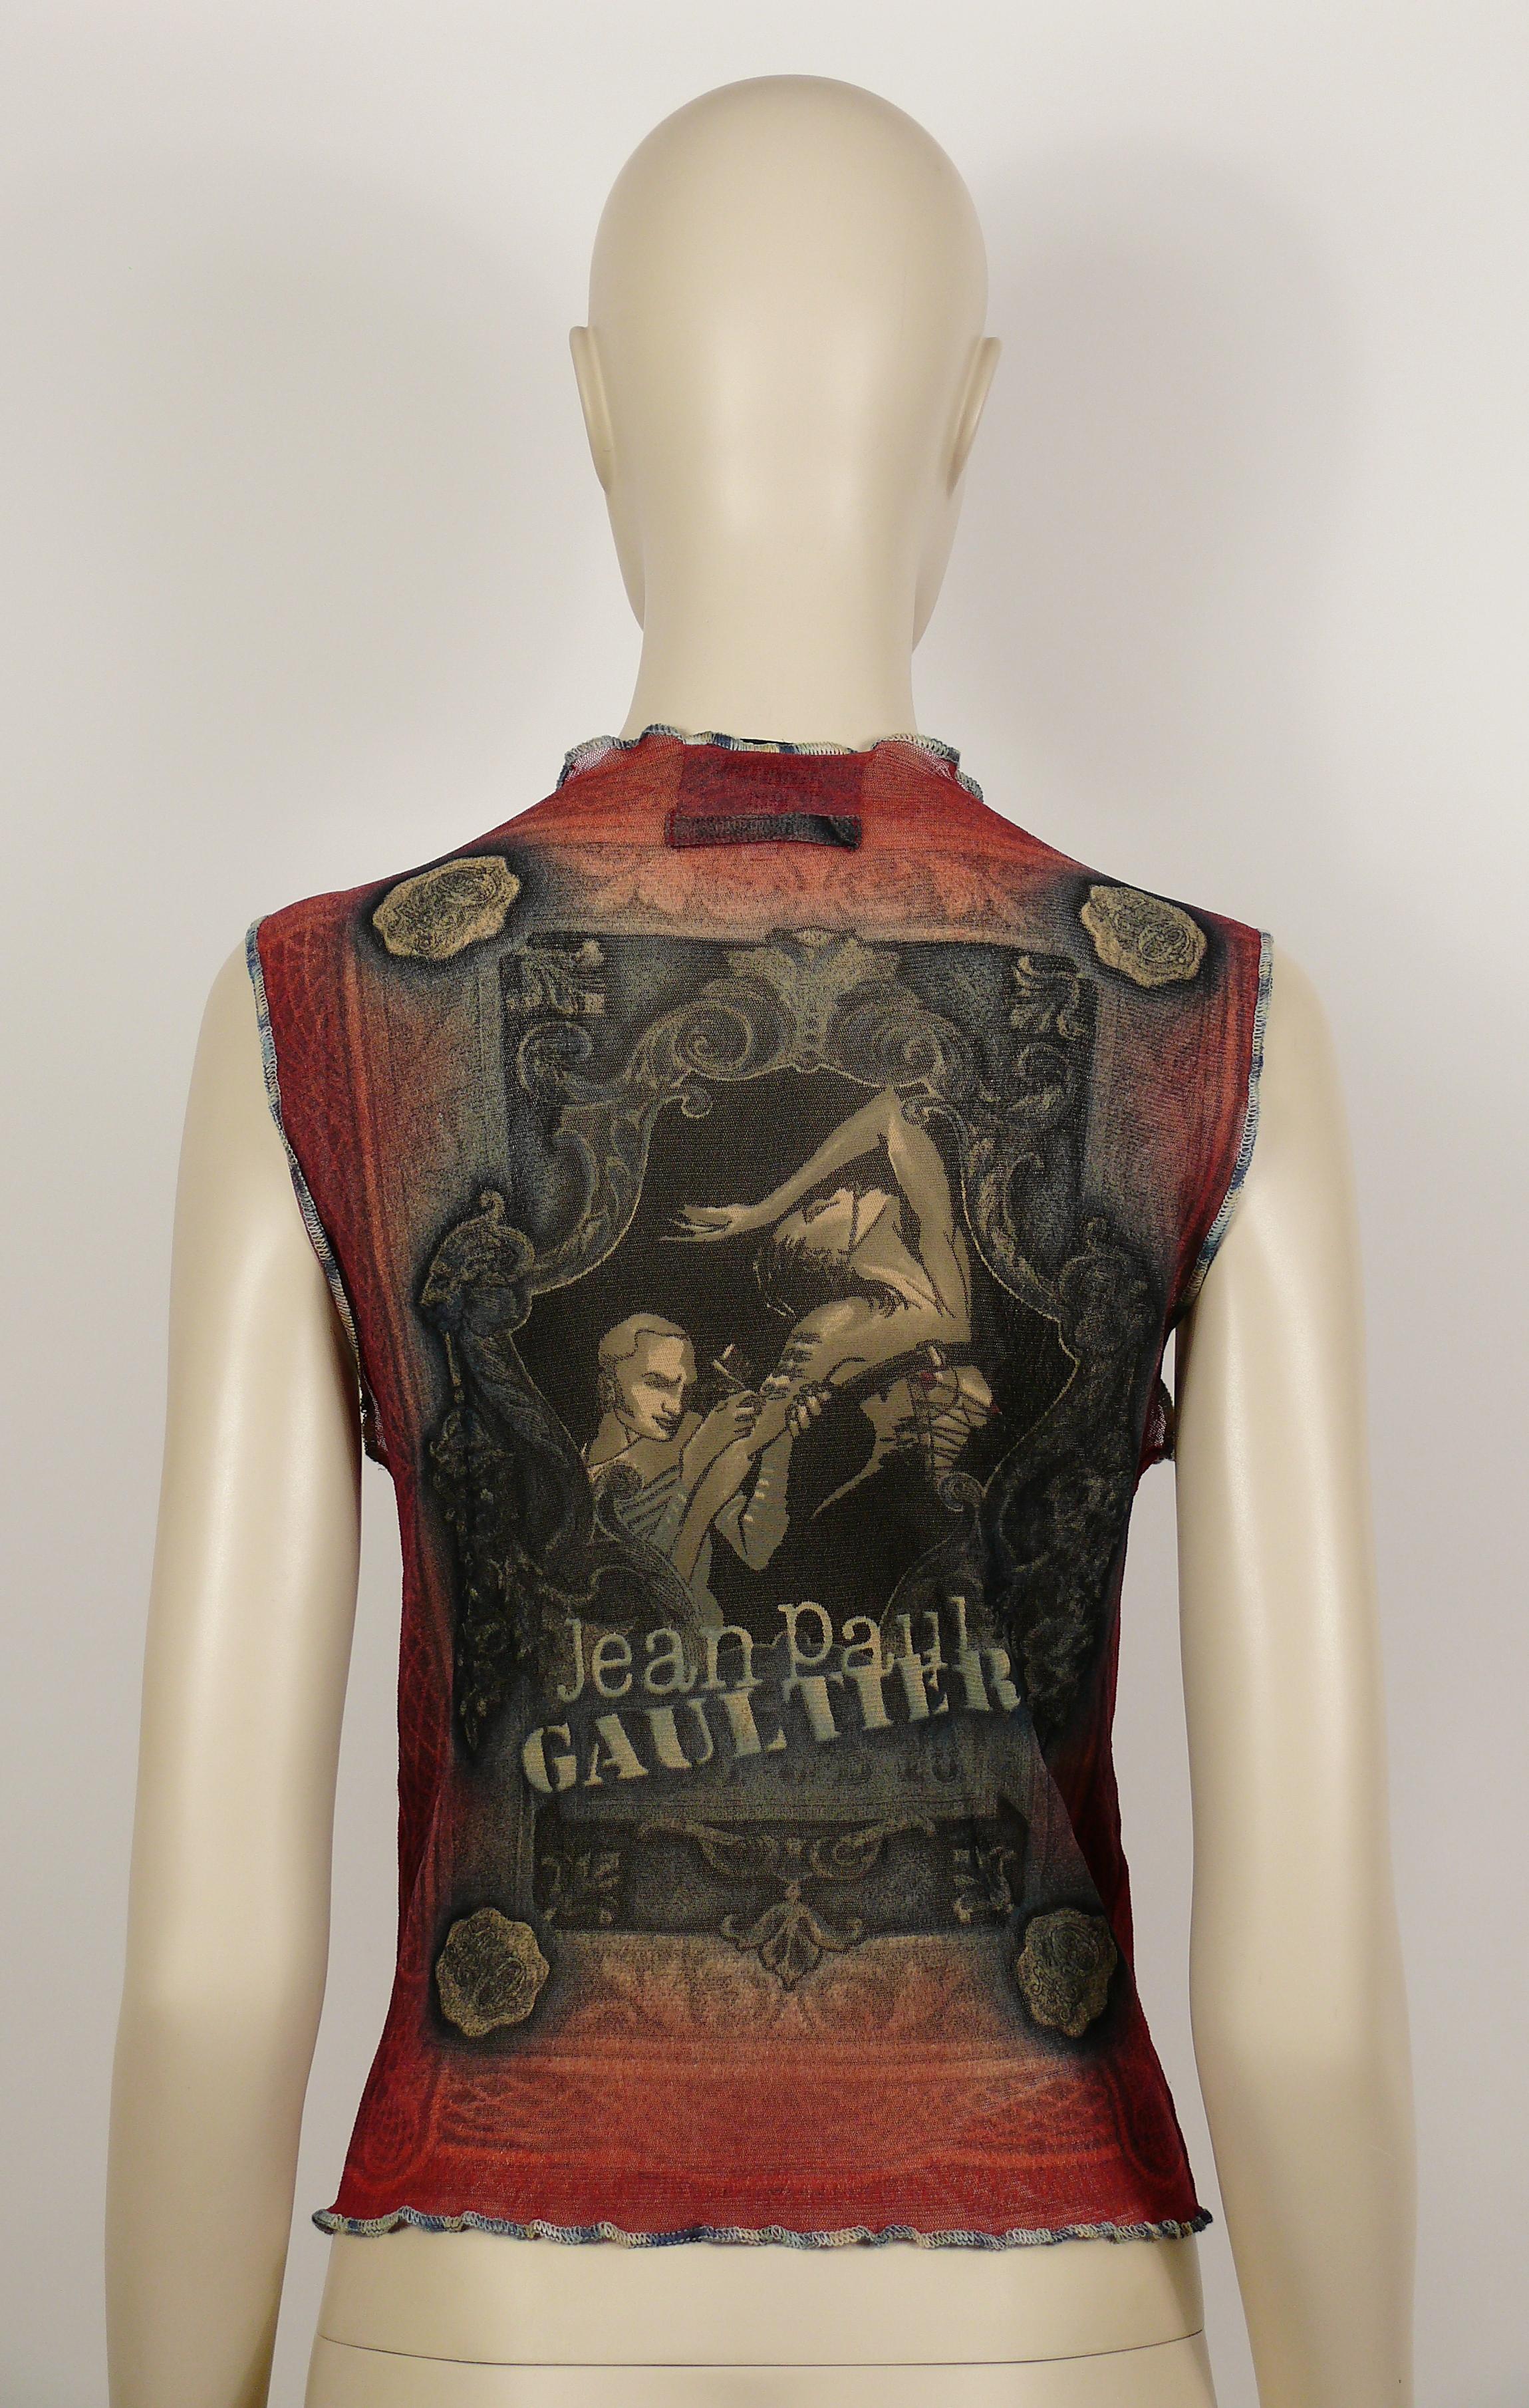 JEAN PAUL GAULTIER vintage sheer FUZZI mesh vest featuring a dramatic tattoo session and JEAN PAUL GAULTIER logo on front and back.

Button down front closure.
Two pockets.

Label reads JEAN PAUL GAULTIER Maille.
Made in Italy.

Size label reads :